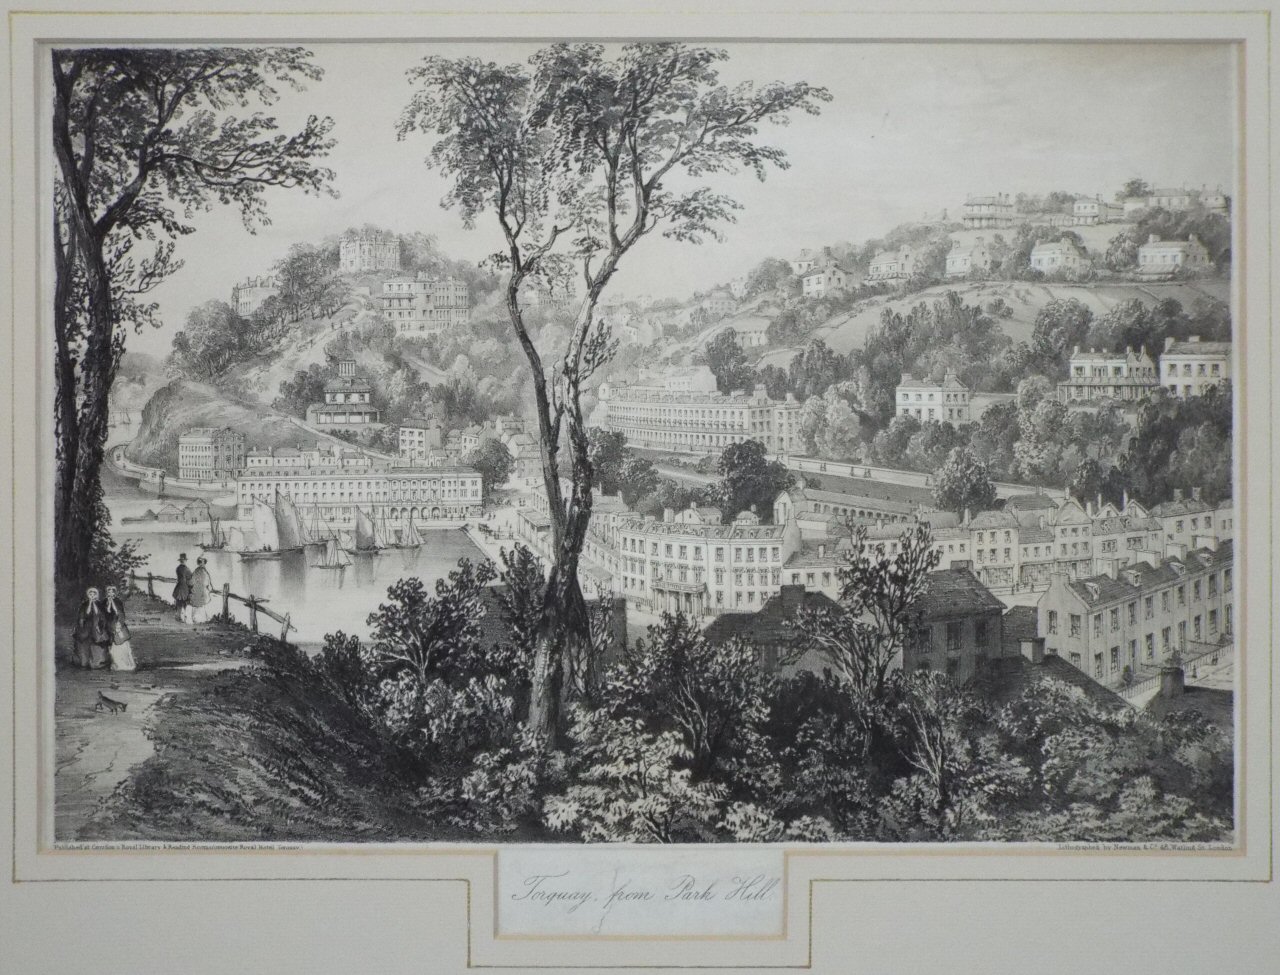 Lithograph - Torquay, from Park Hill. - Newman